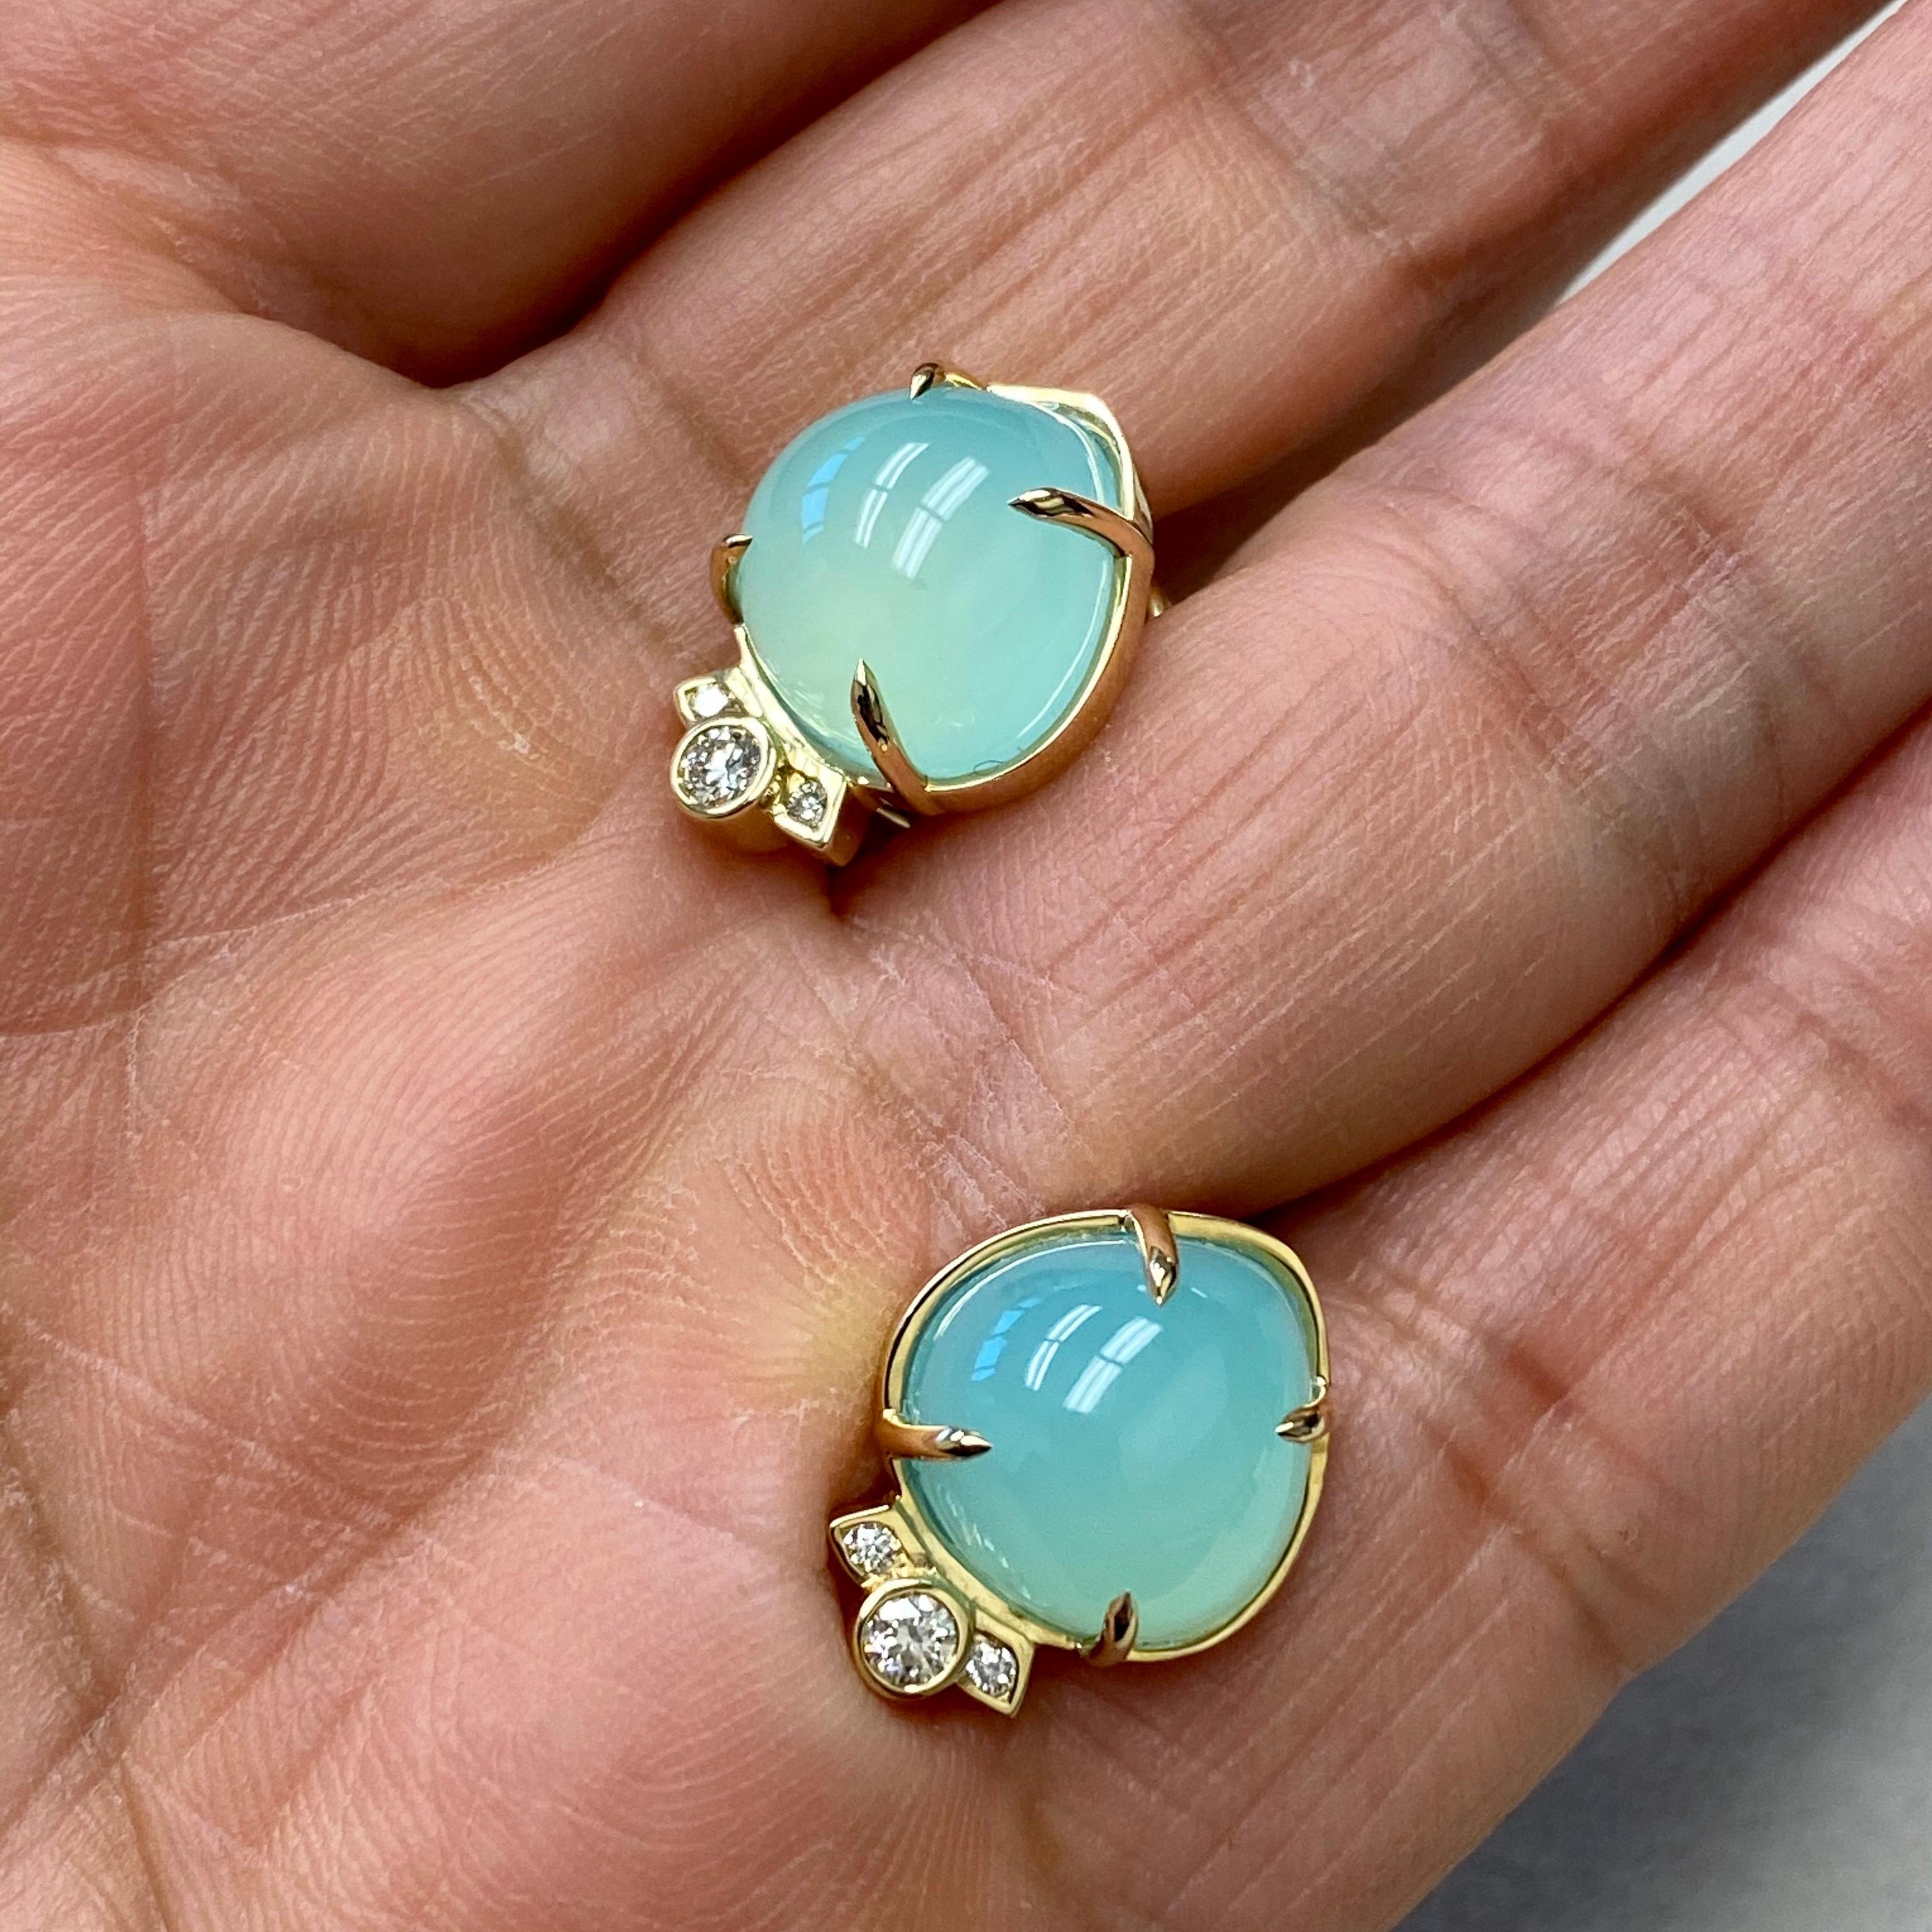 Created in 18 karat yellow gold
Sea Foam Green Chalcedony 14 cts approx
Diamonds 0.15 cts approx
Omega clip-backs & posts
Limited Edition

Take your look to the next level with these exquisite, limited edition Candy Blue Topaz & Diamond earrings.